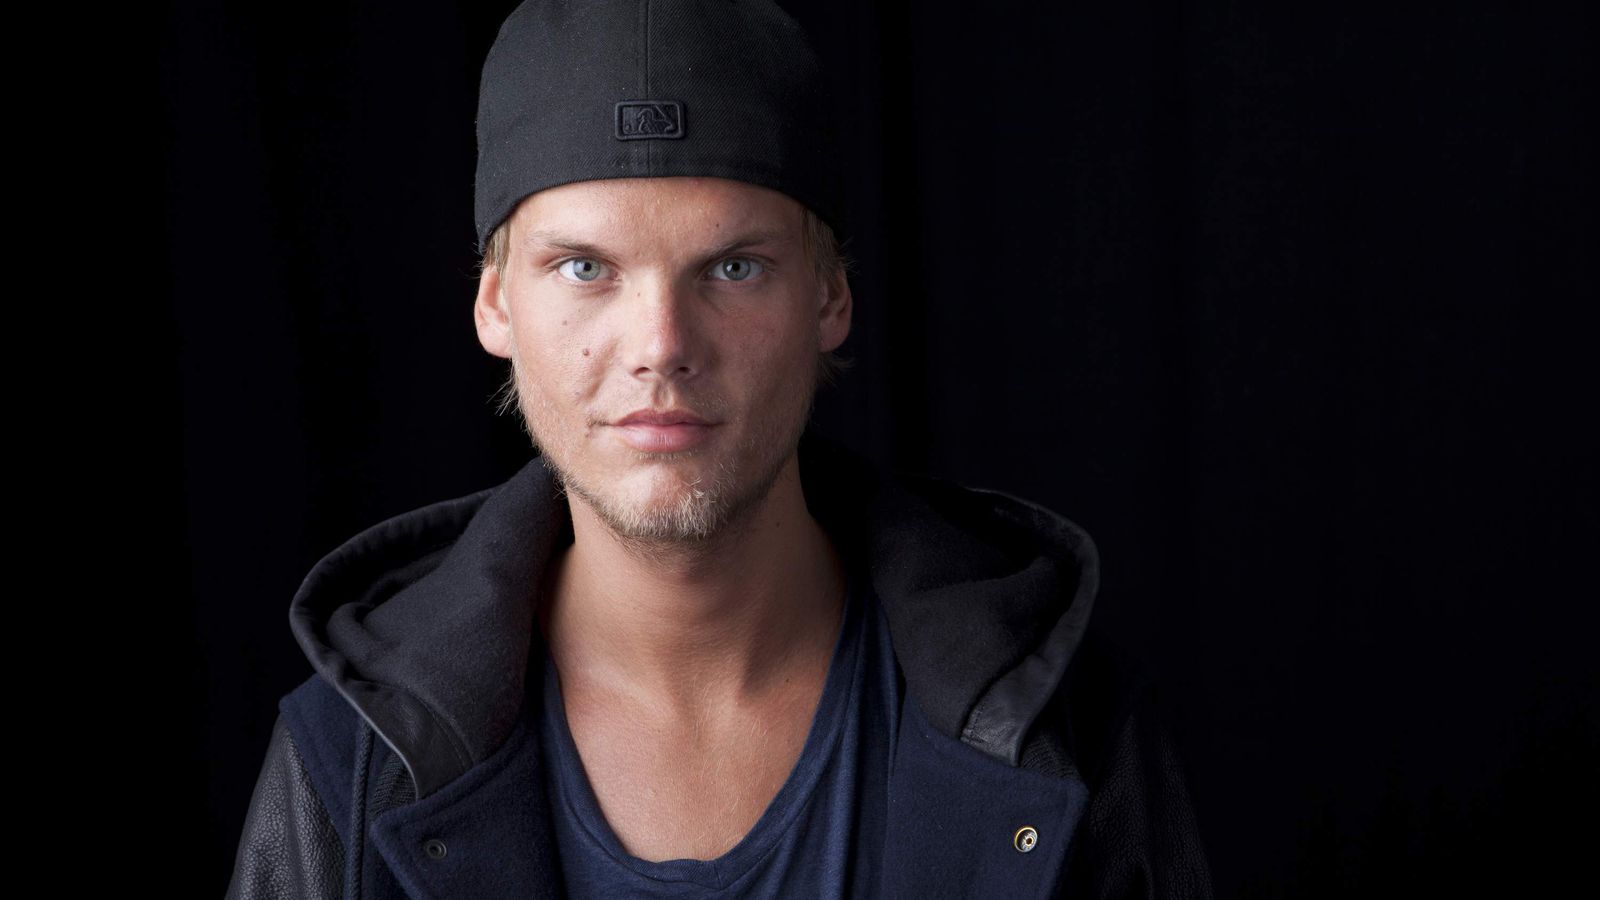 Producer and DJ Avicii has been found dead